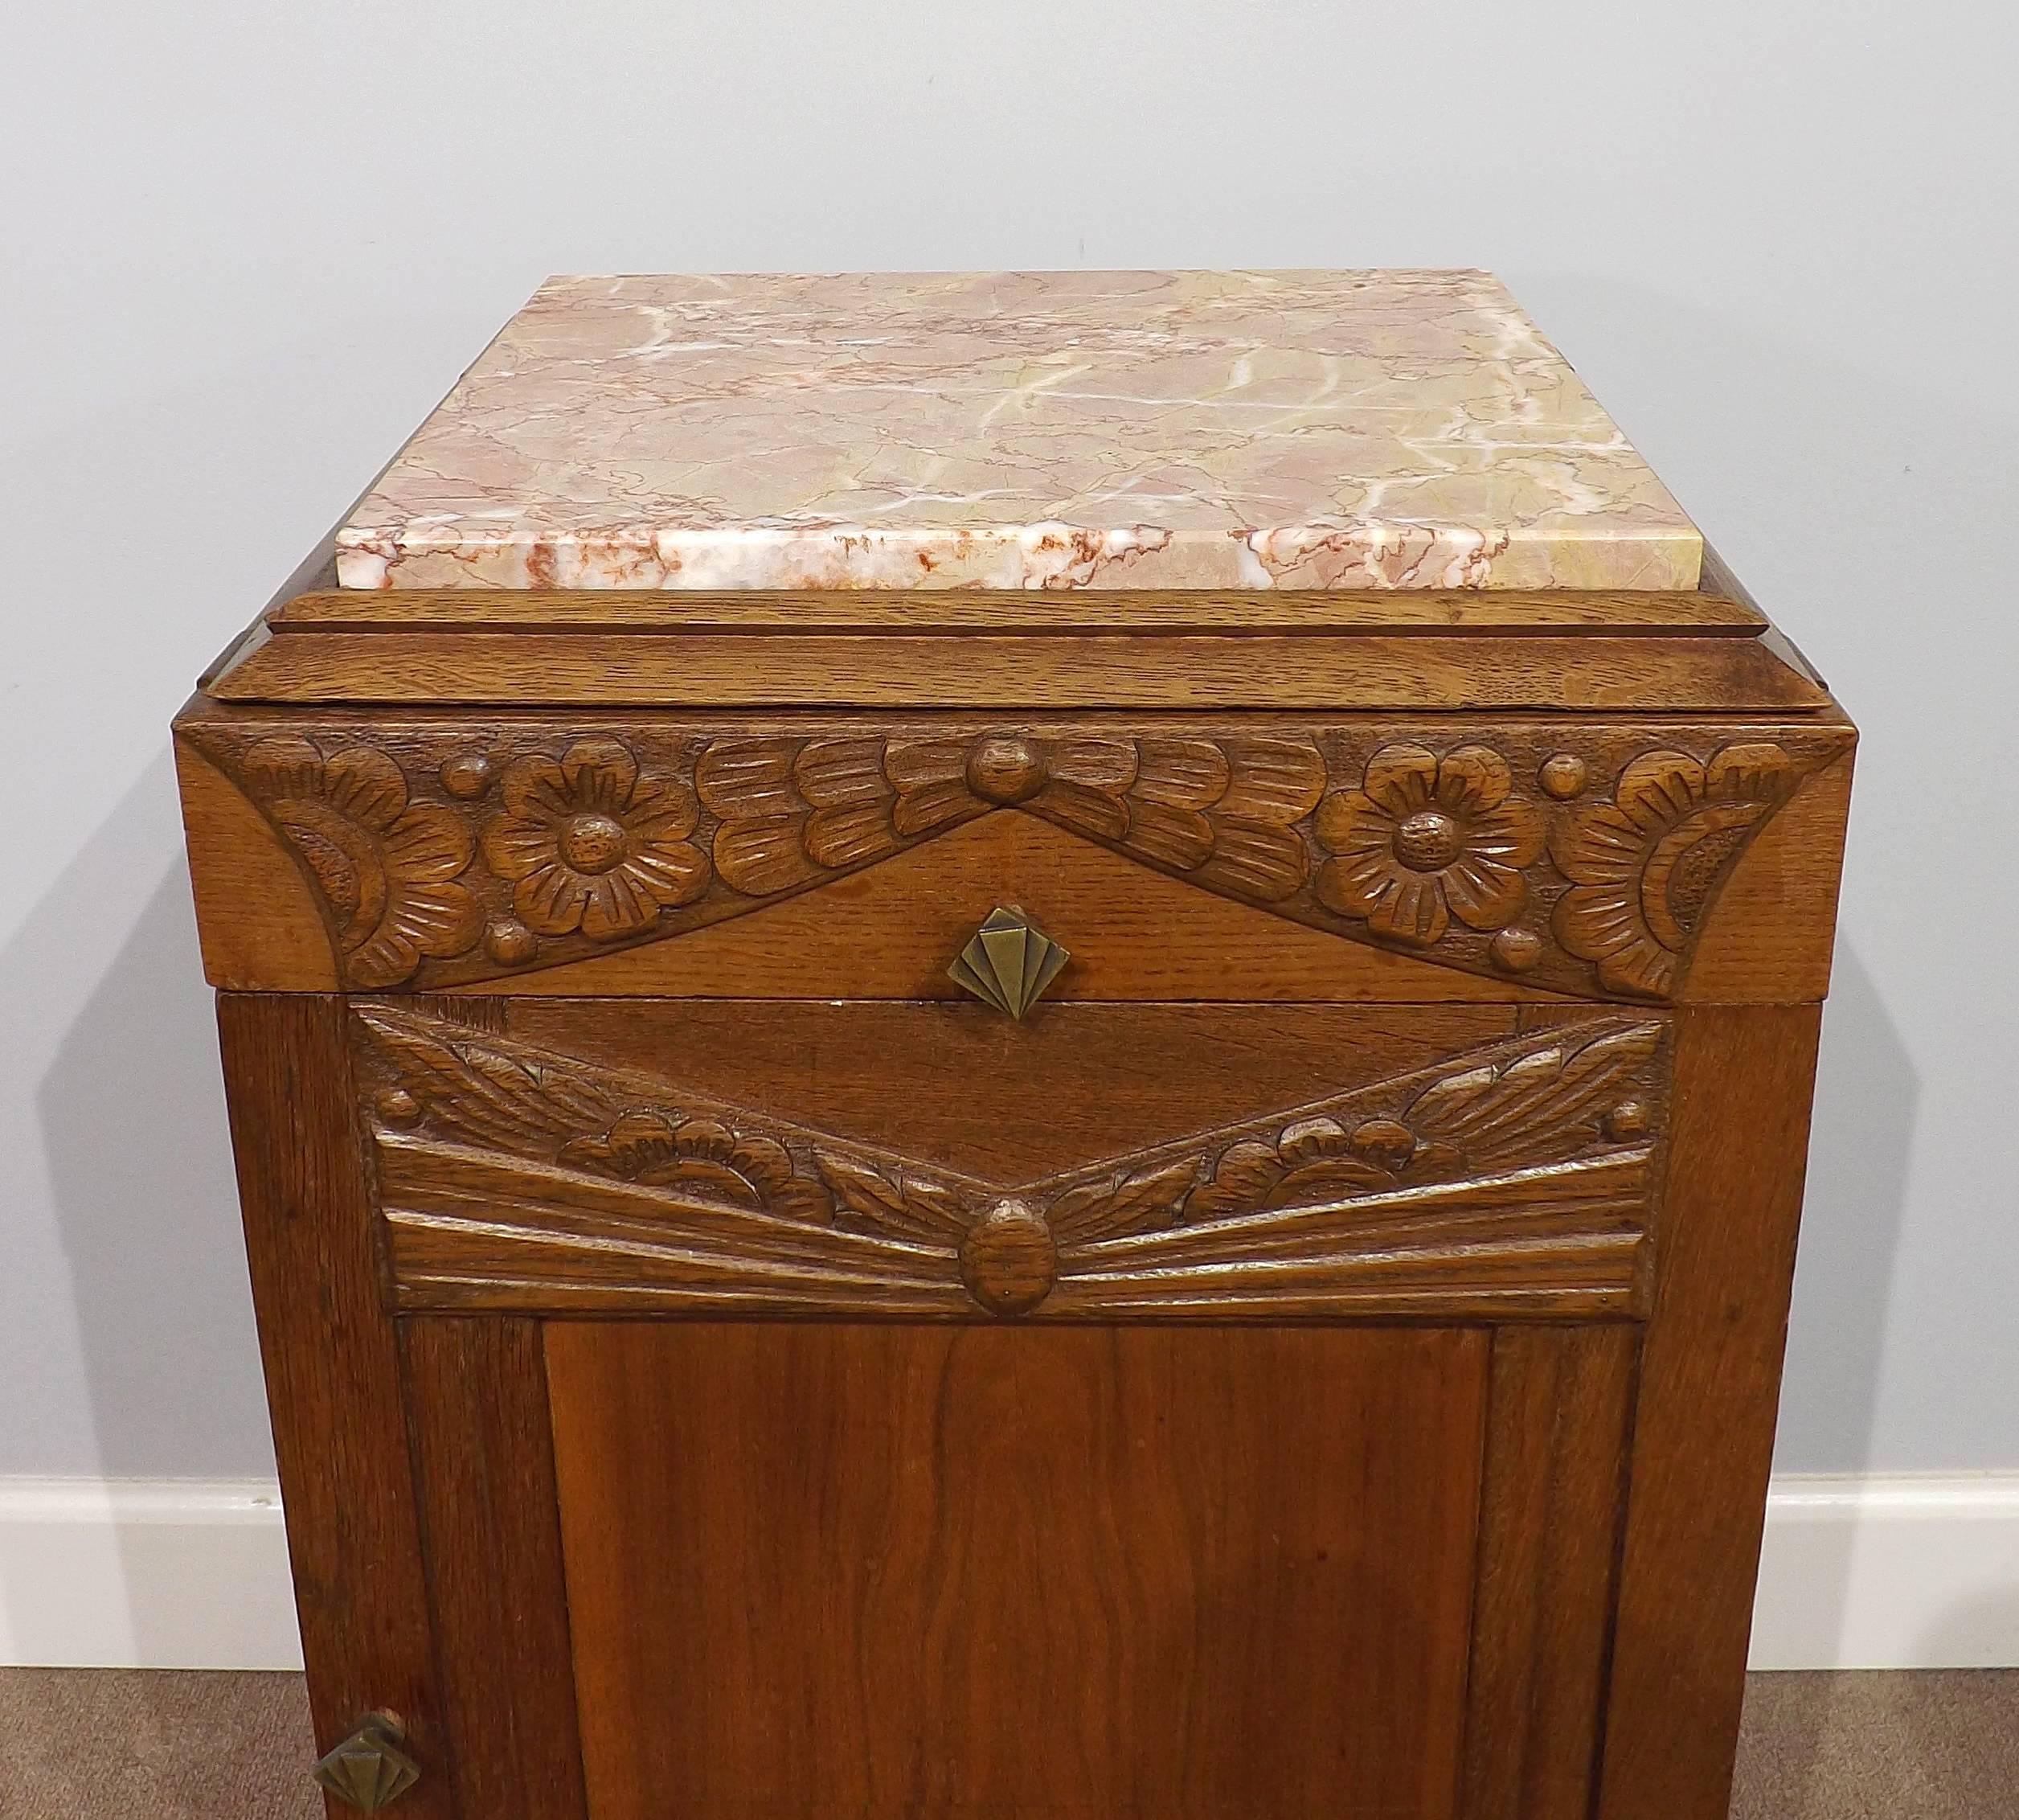 A gorgeous pink marble top Art Deco oak cabinet from the 1930s, with original ornate hardware and wonderful floral carving.